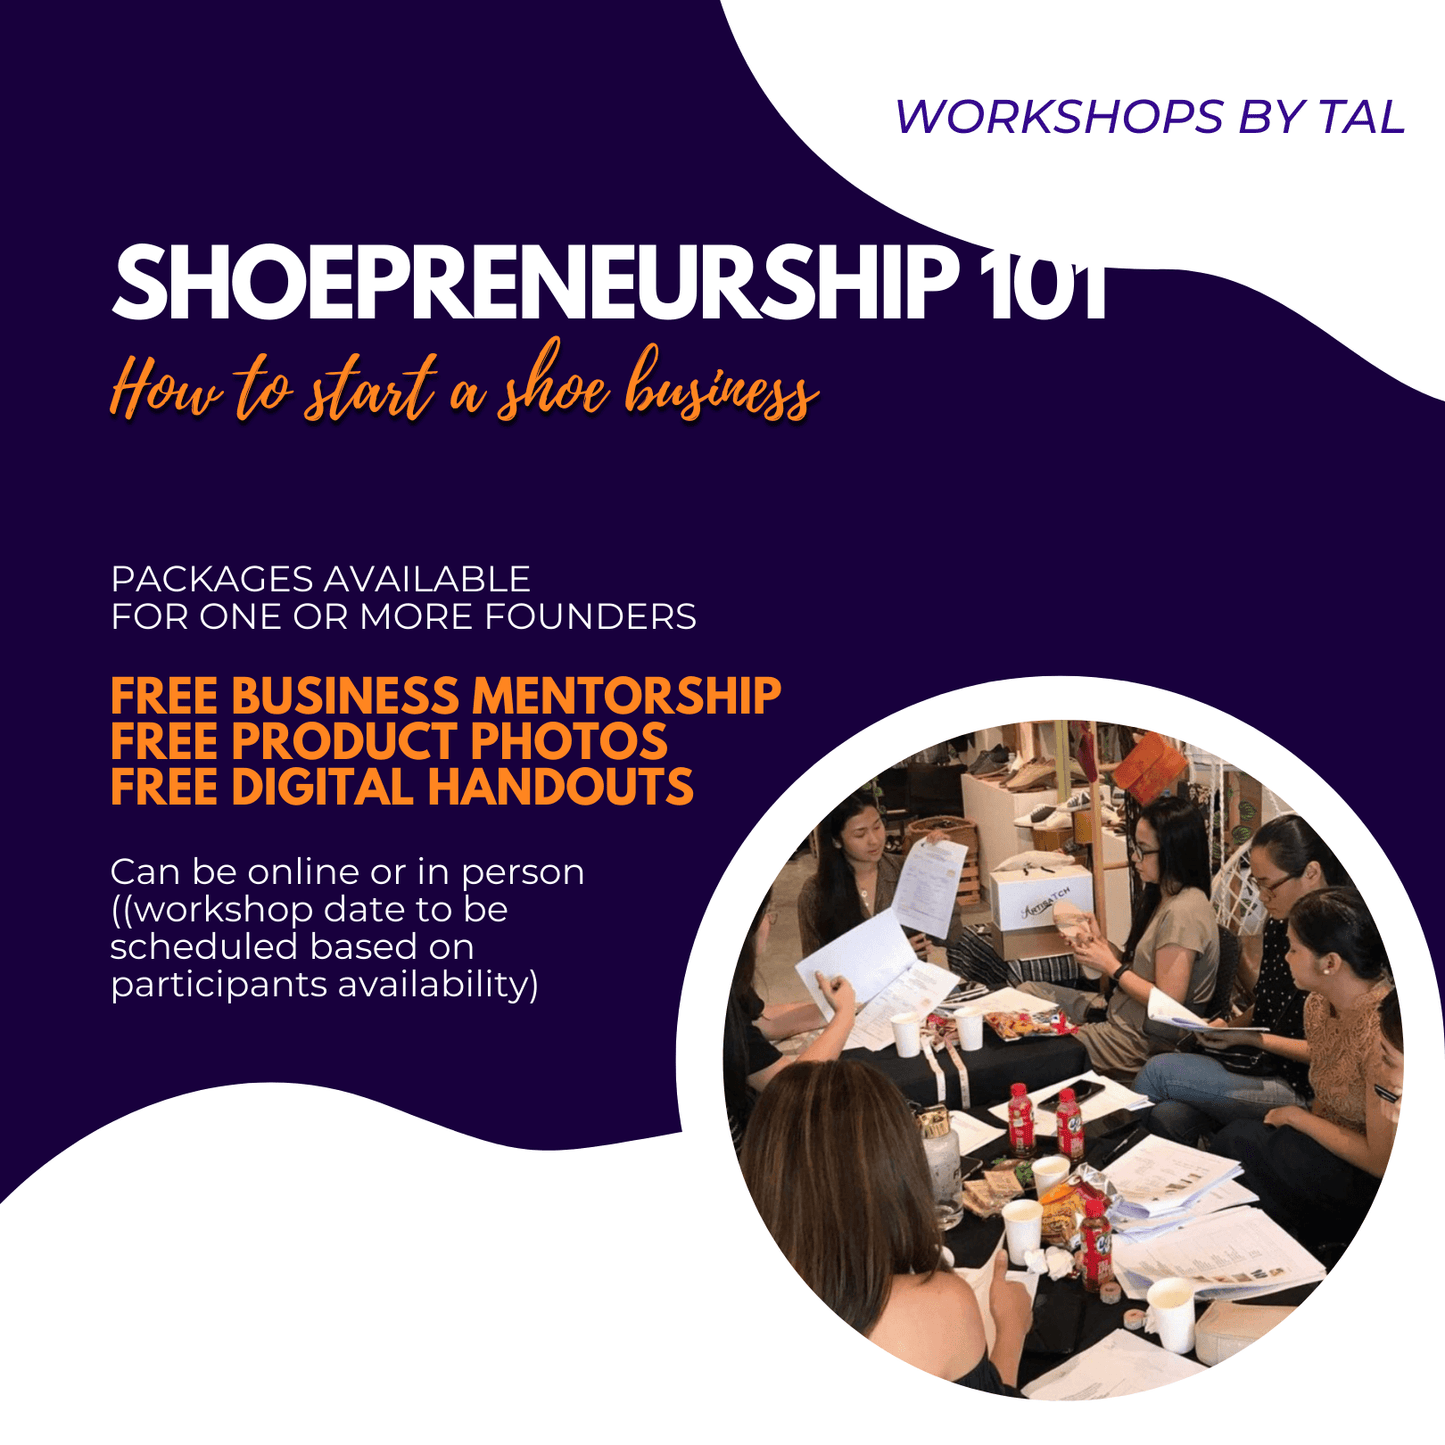 Shoepreneurship 101 (online or in person)